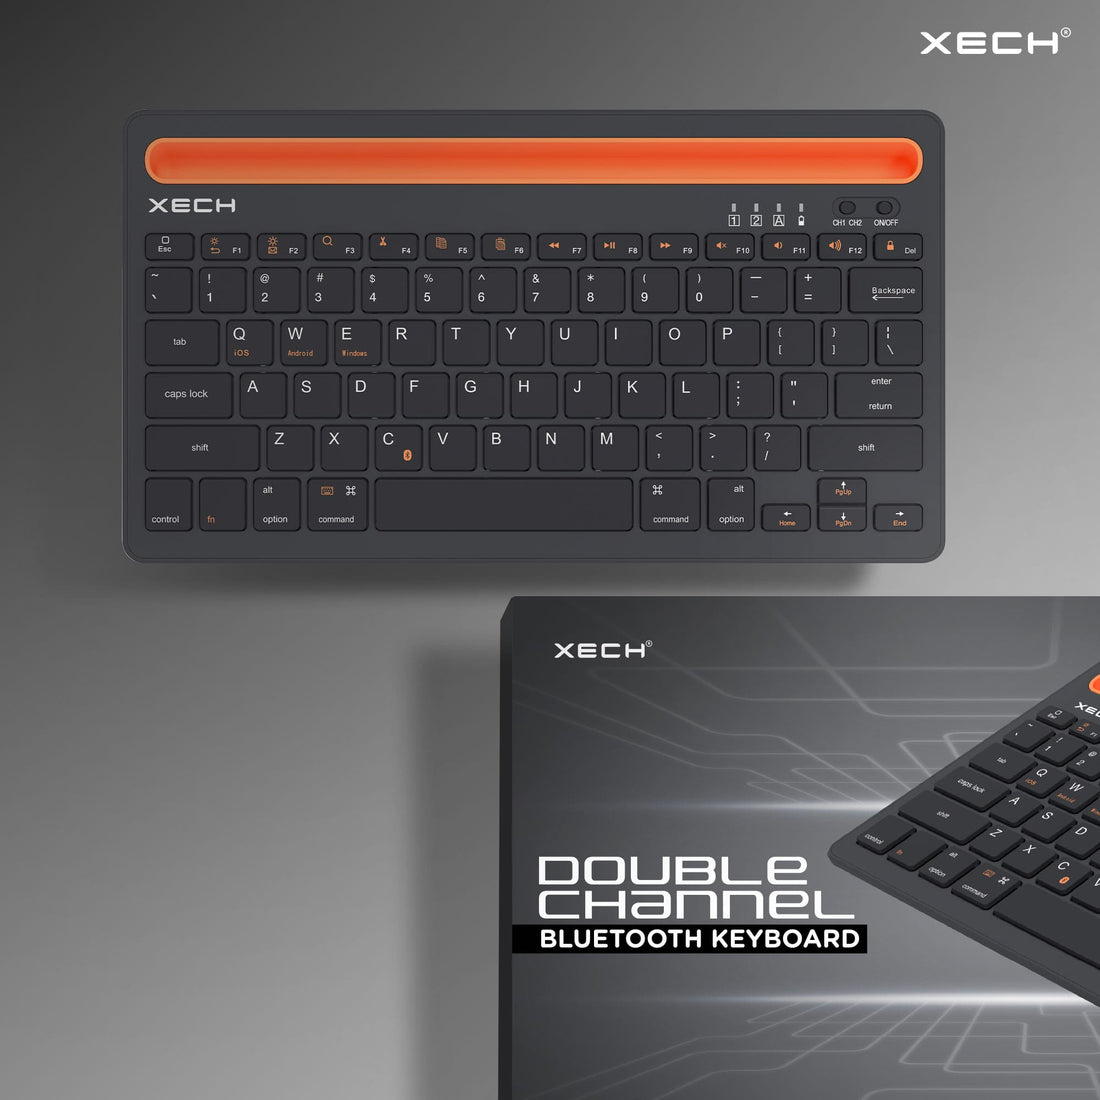 Personalized Double Channel Bluetooth Wireless Keyboard - For Corporate Gifting, Office Gift Item, Return Gift, Event Gifts, Promotions